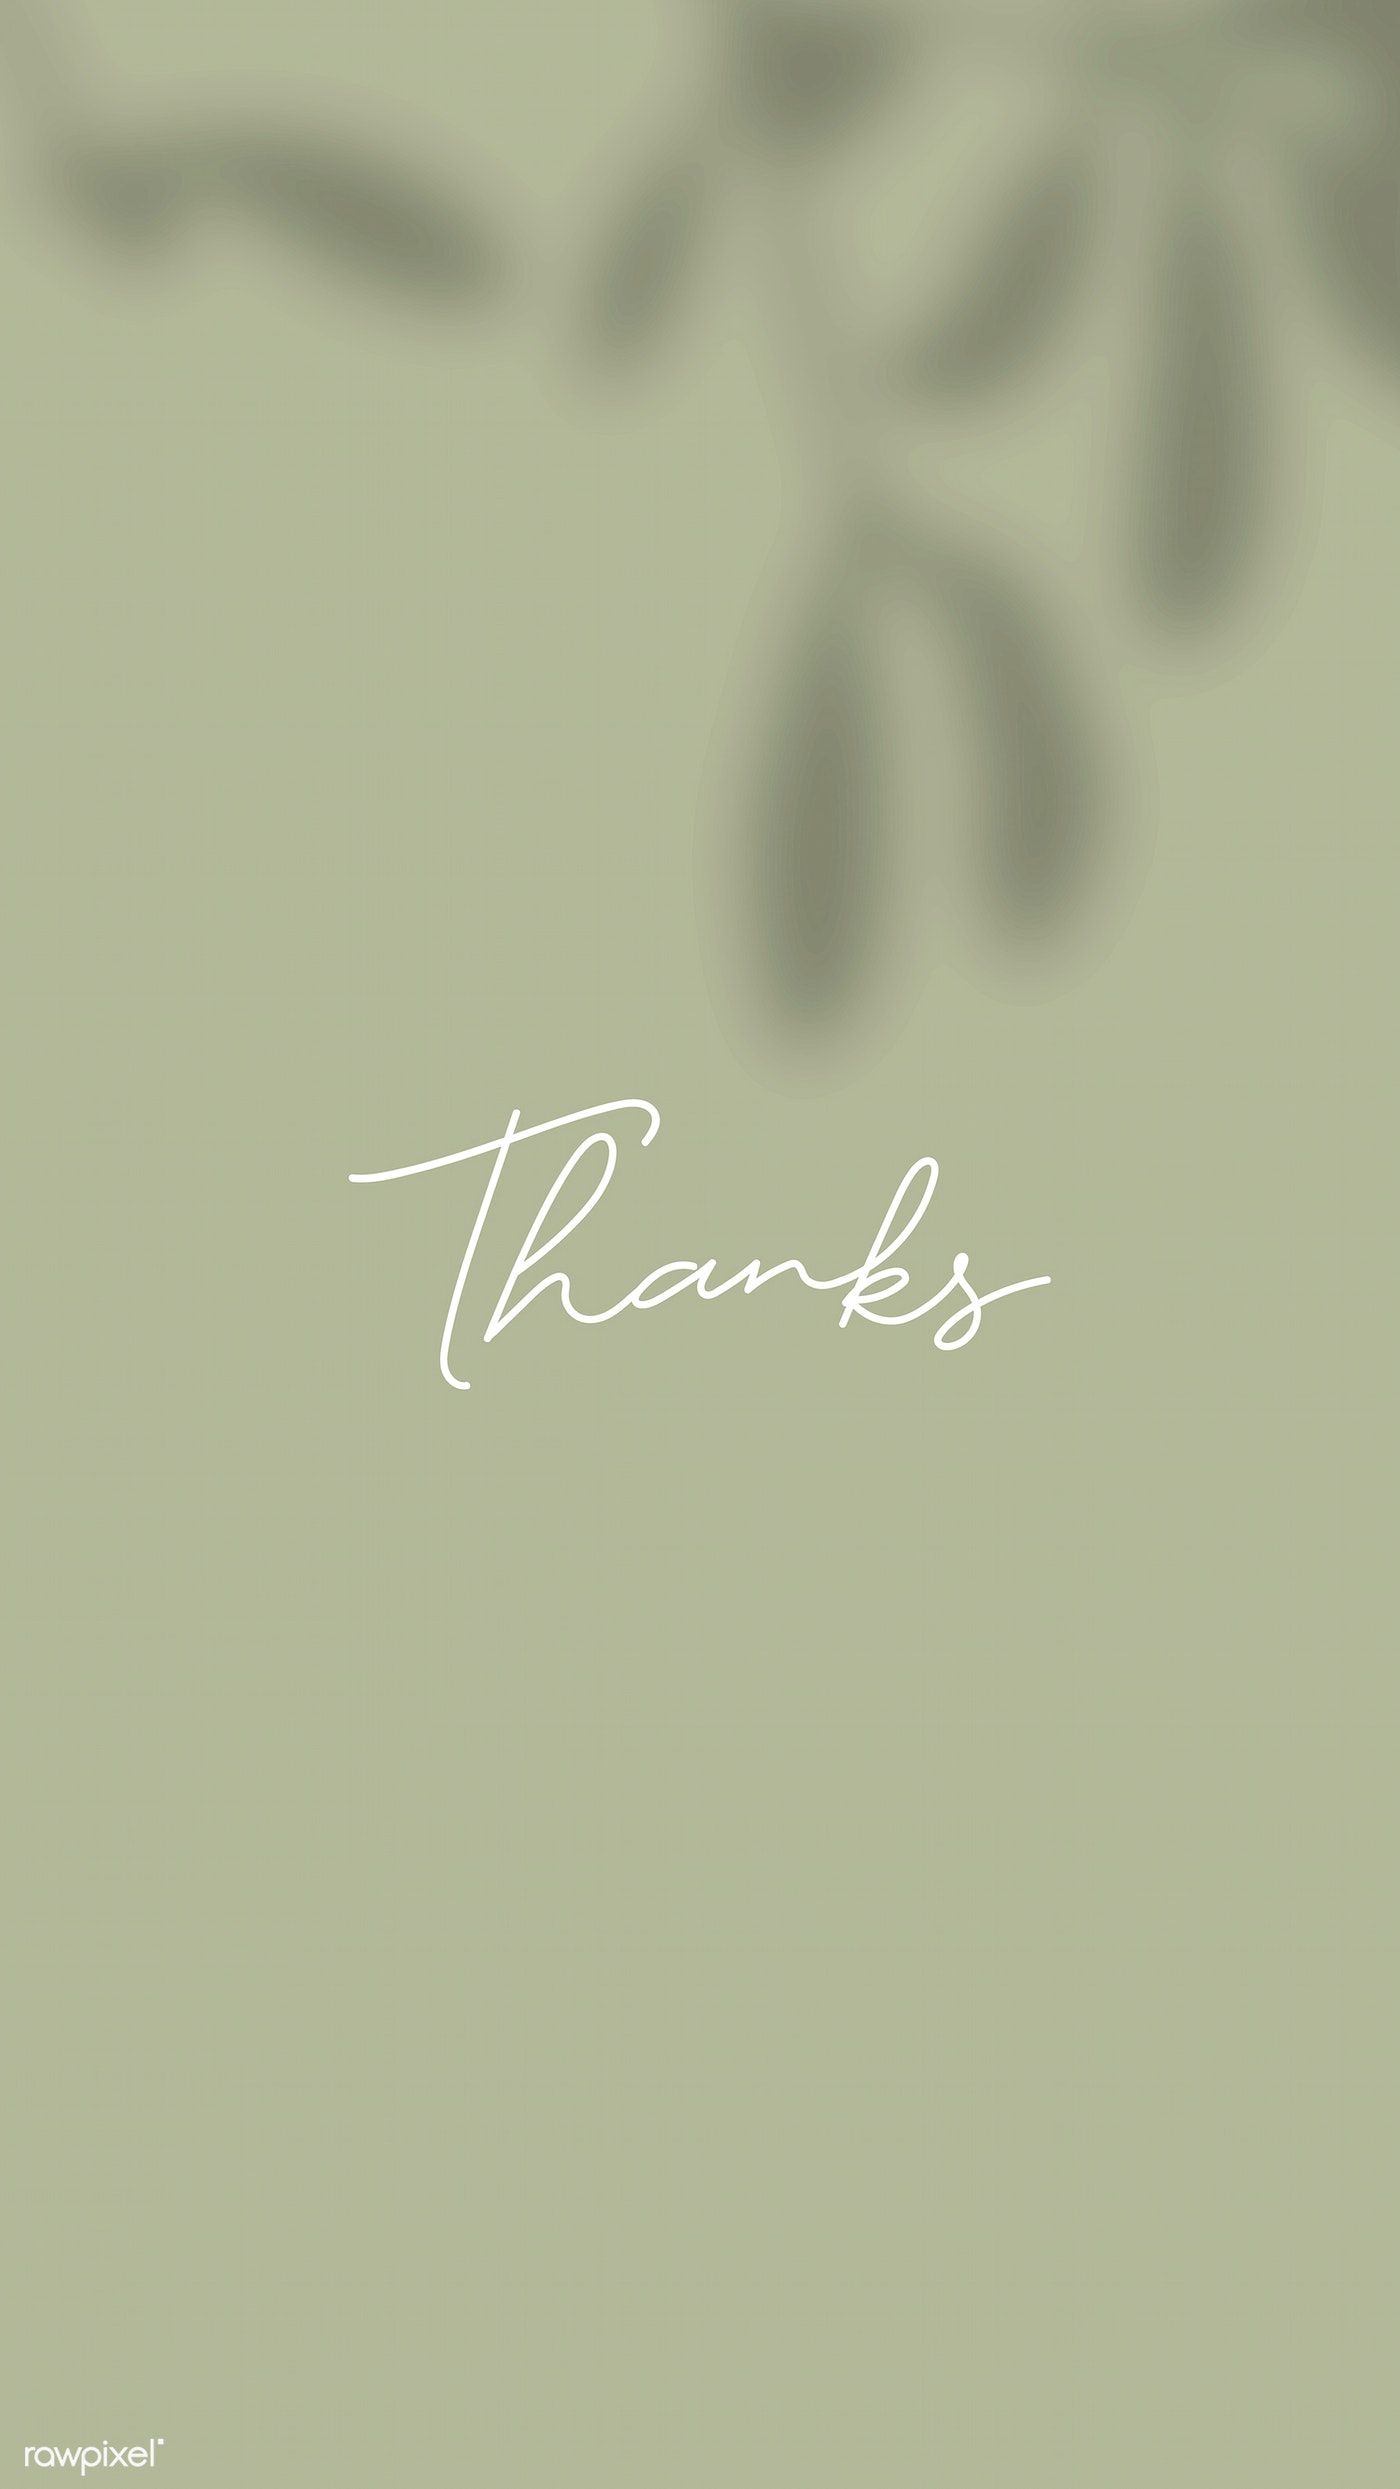 Thanks on a green background mobile wallpaper vector. free image by rawpixel.com / Aew ในปี 2020